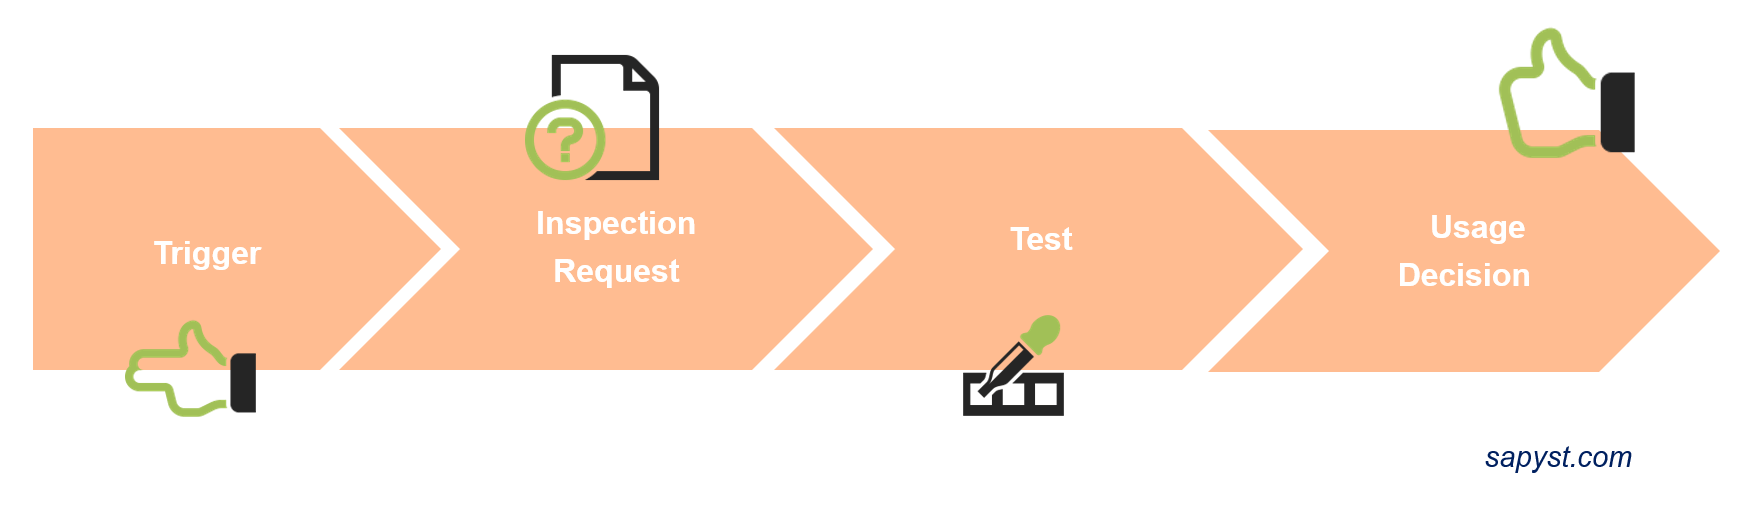 Steps for Quality Assurance and Control